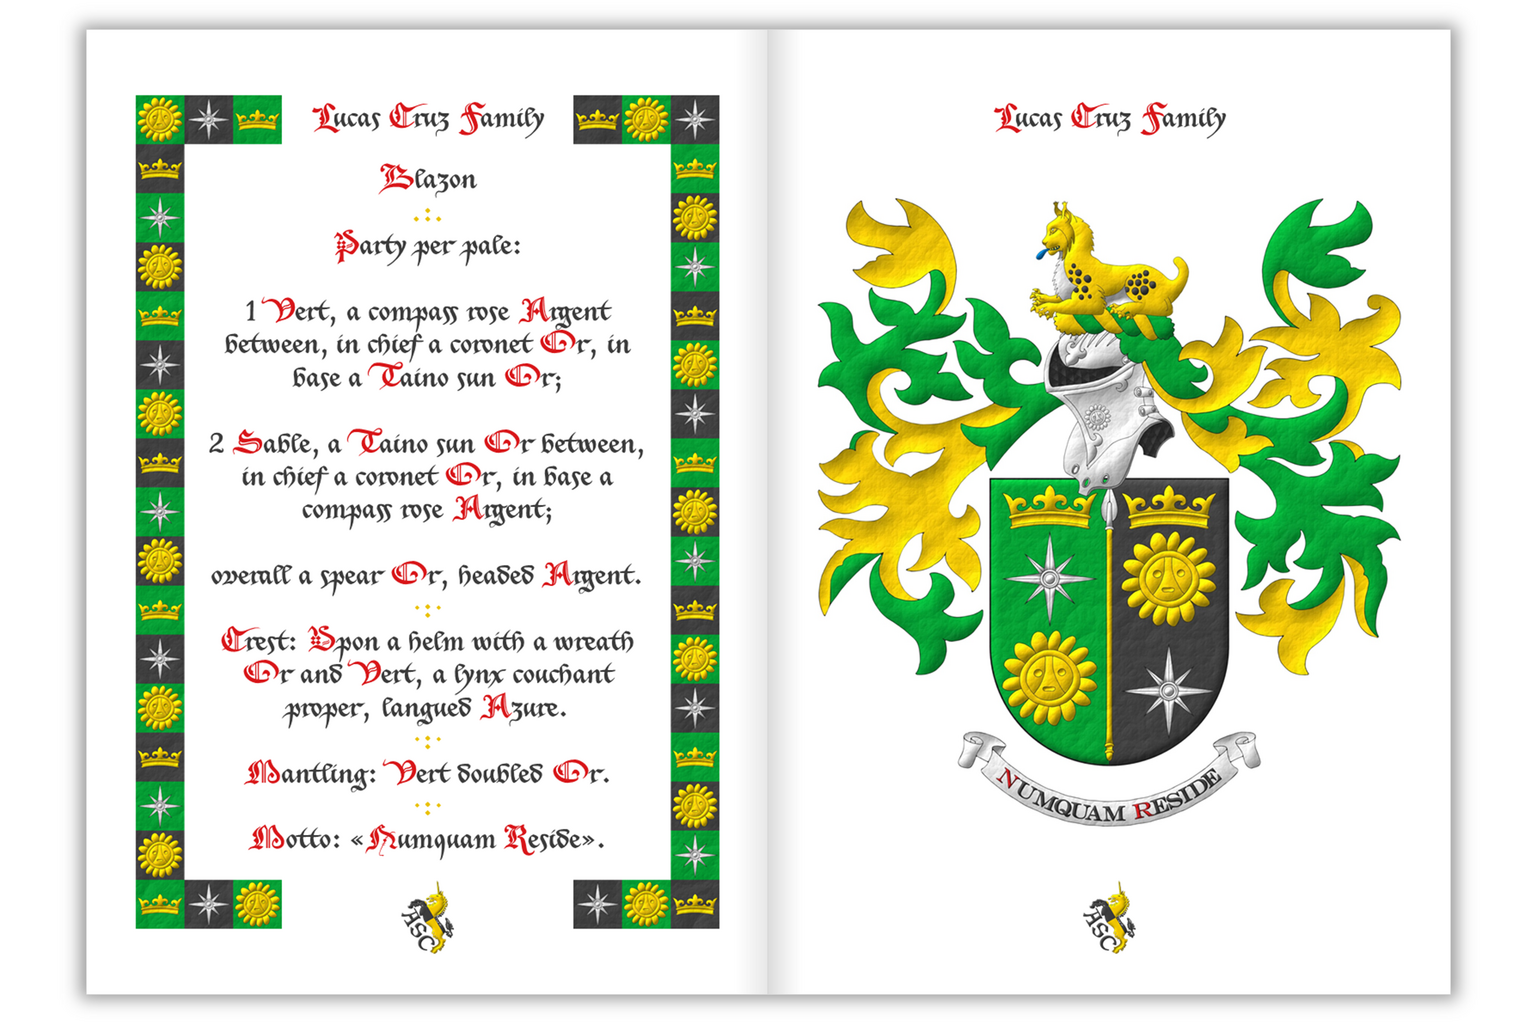 Heraldic document for the coat of arms of Lucas Cruz's family (UK, Puerto Rico, Belarus, US Army). The pages have a heraldic frame with the elements of his coat of arms. This document and all its illustrations have been emblazoned by me.